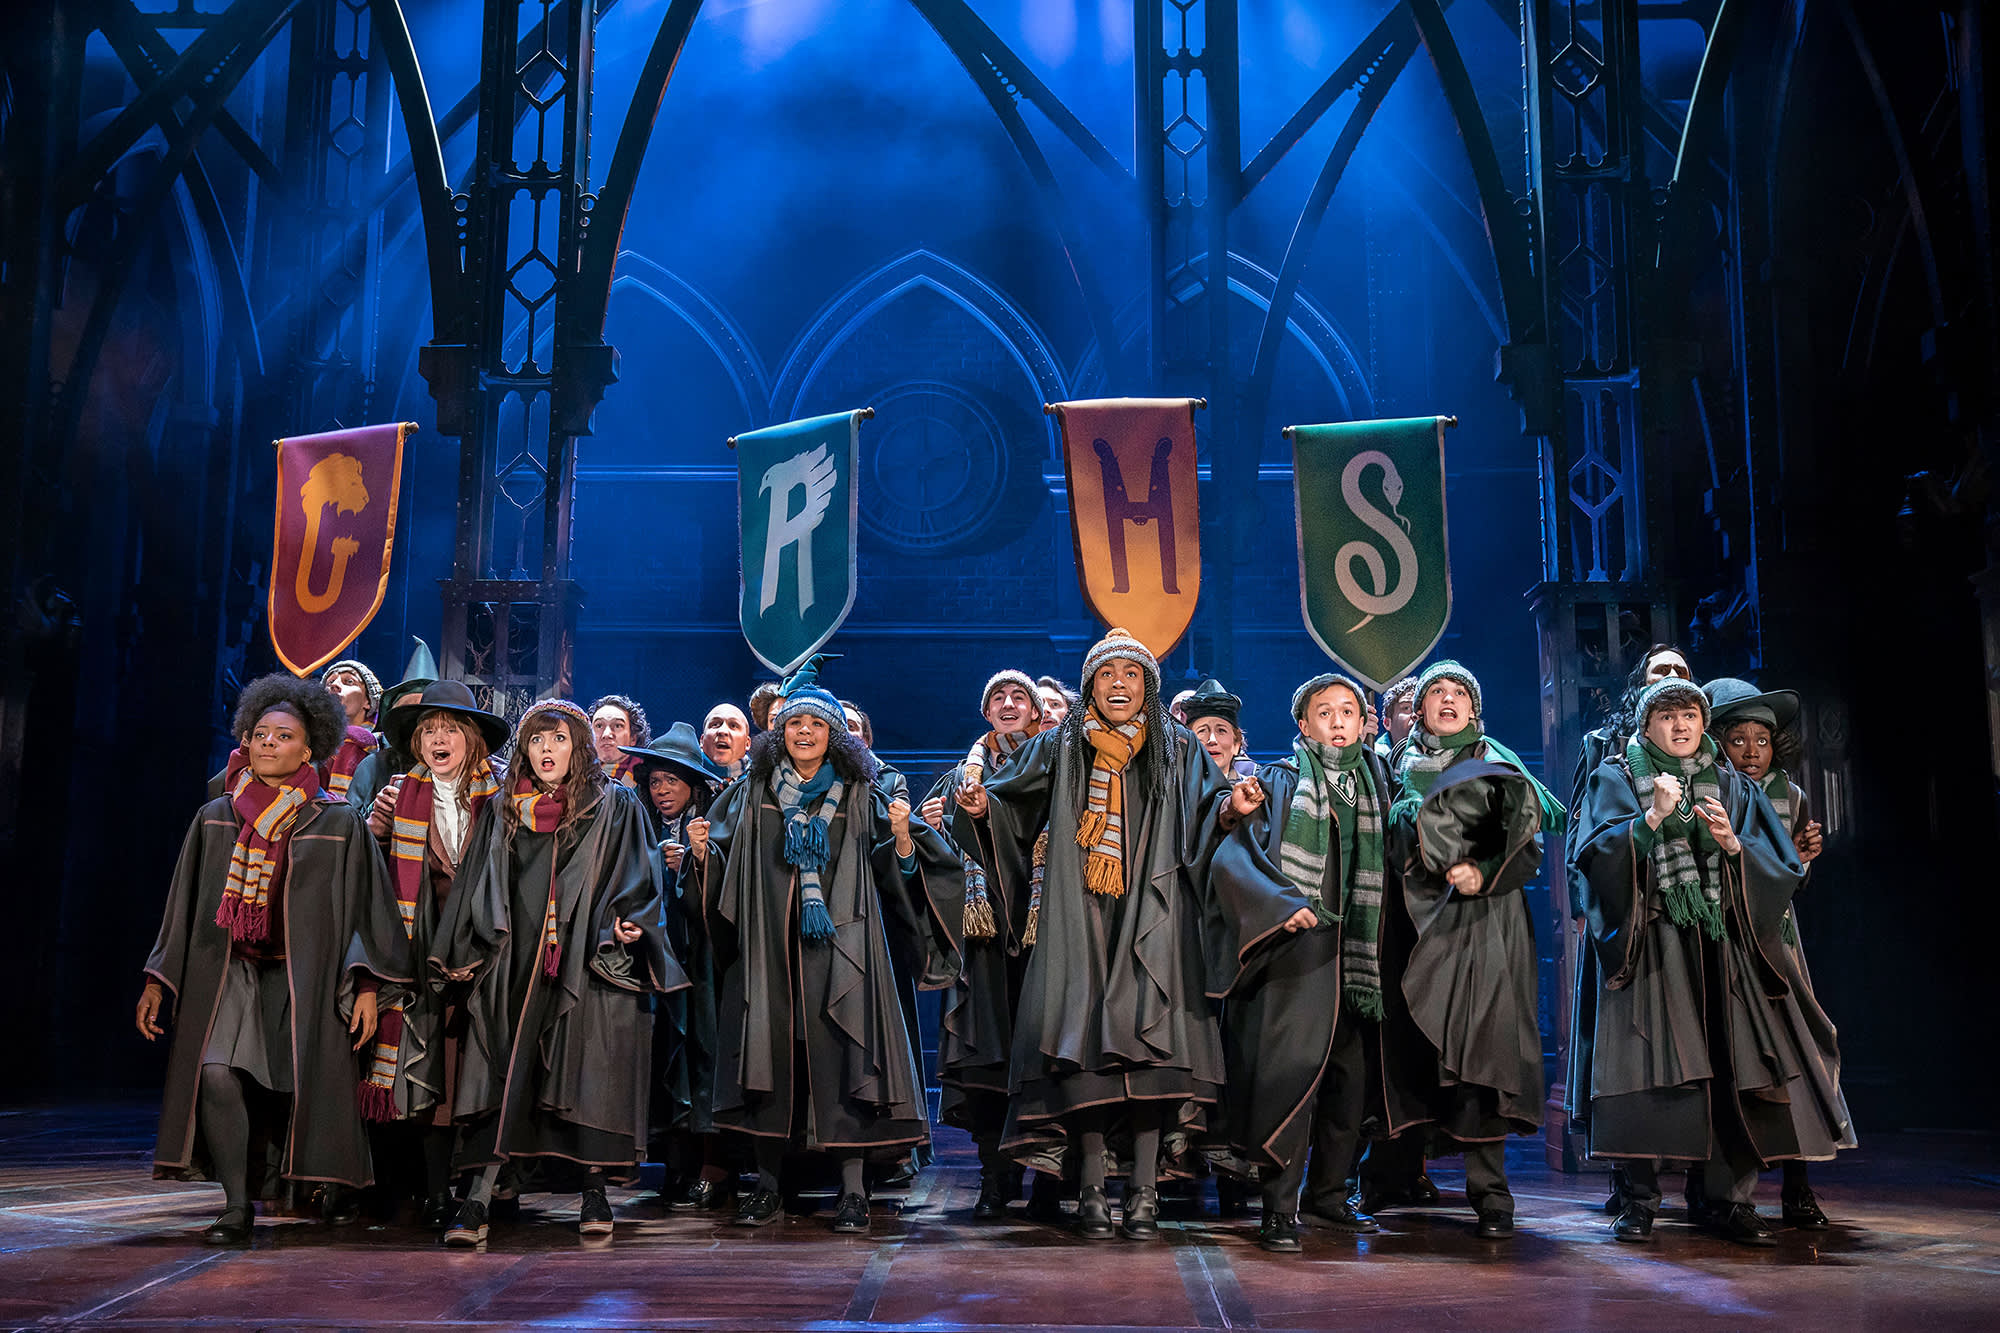 Hogwarts students of all houses gathered together shouting and cheering, some are holding banners.